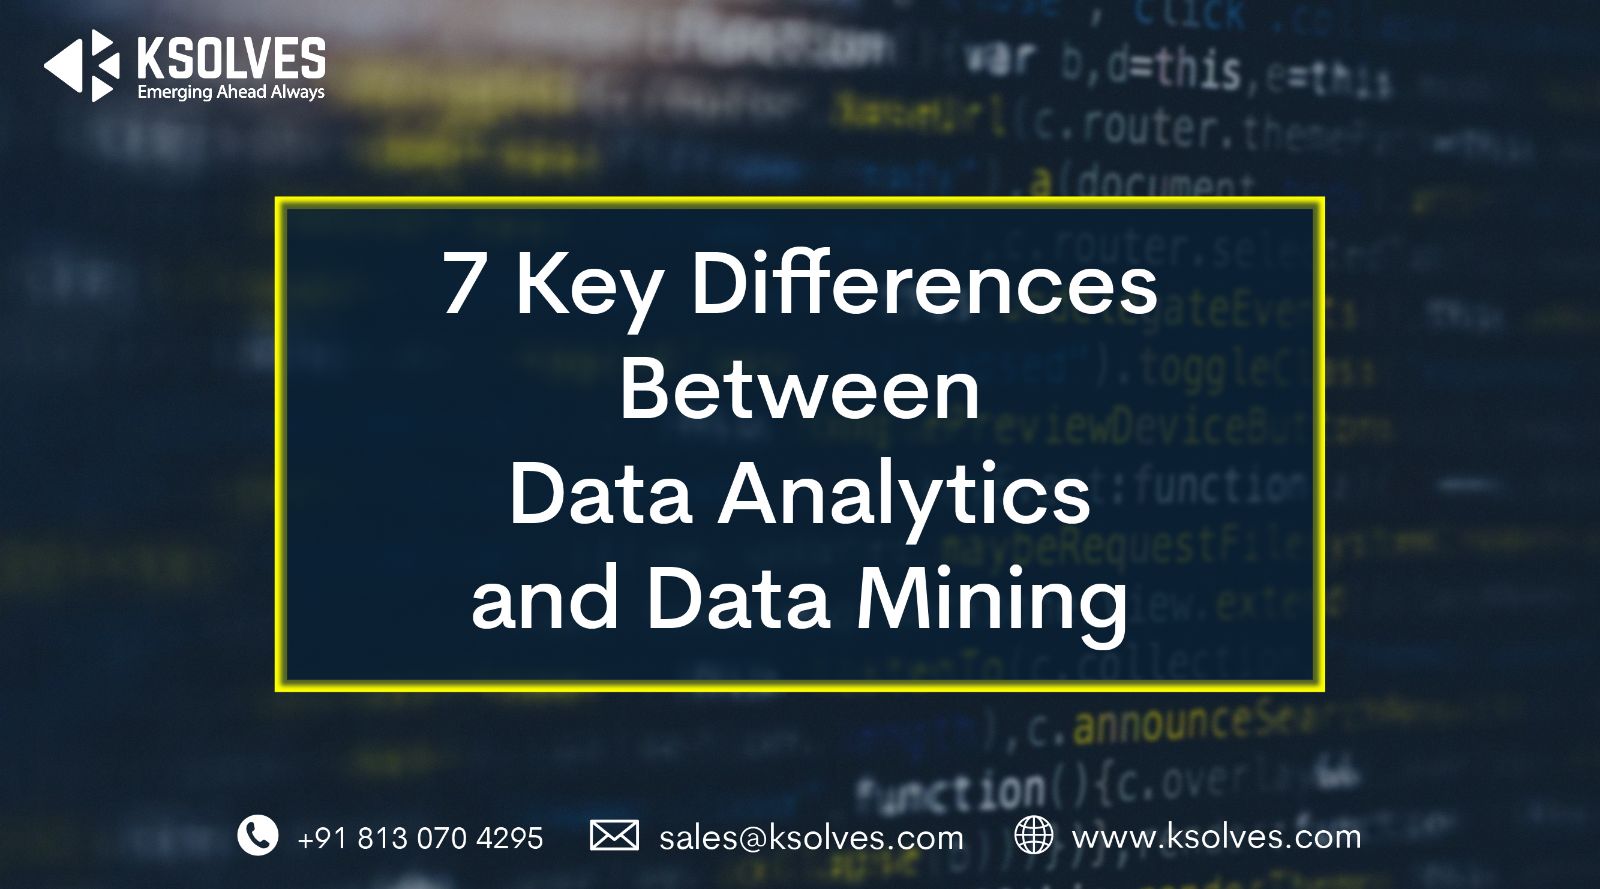 7 Key Differences Between Data Analytics and Data Mining